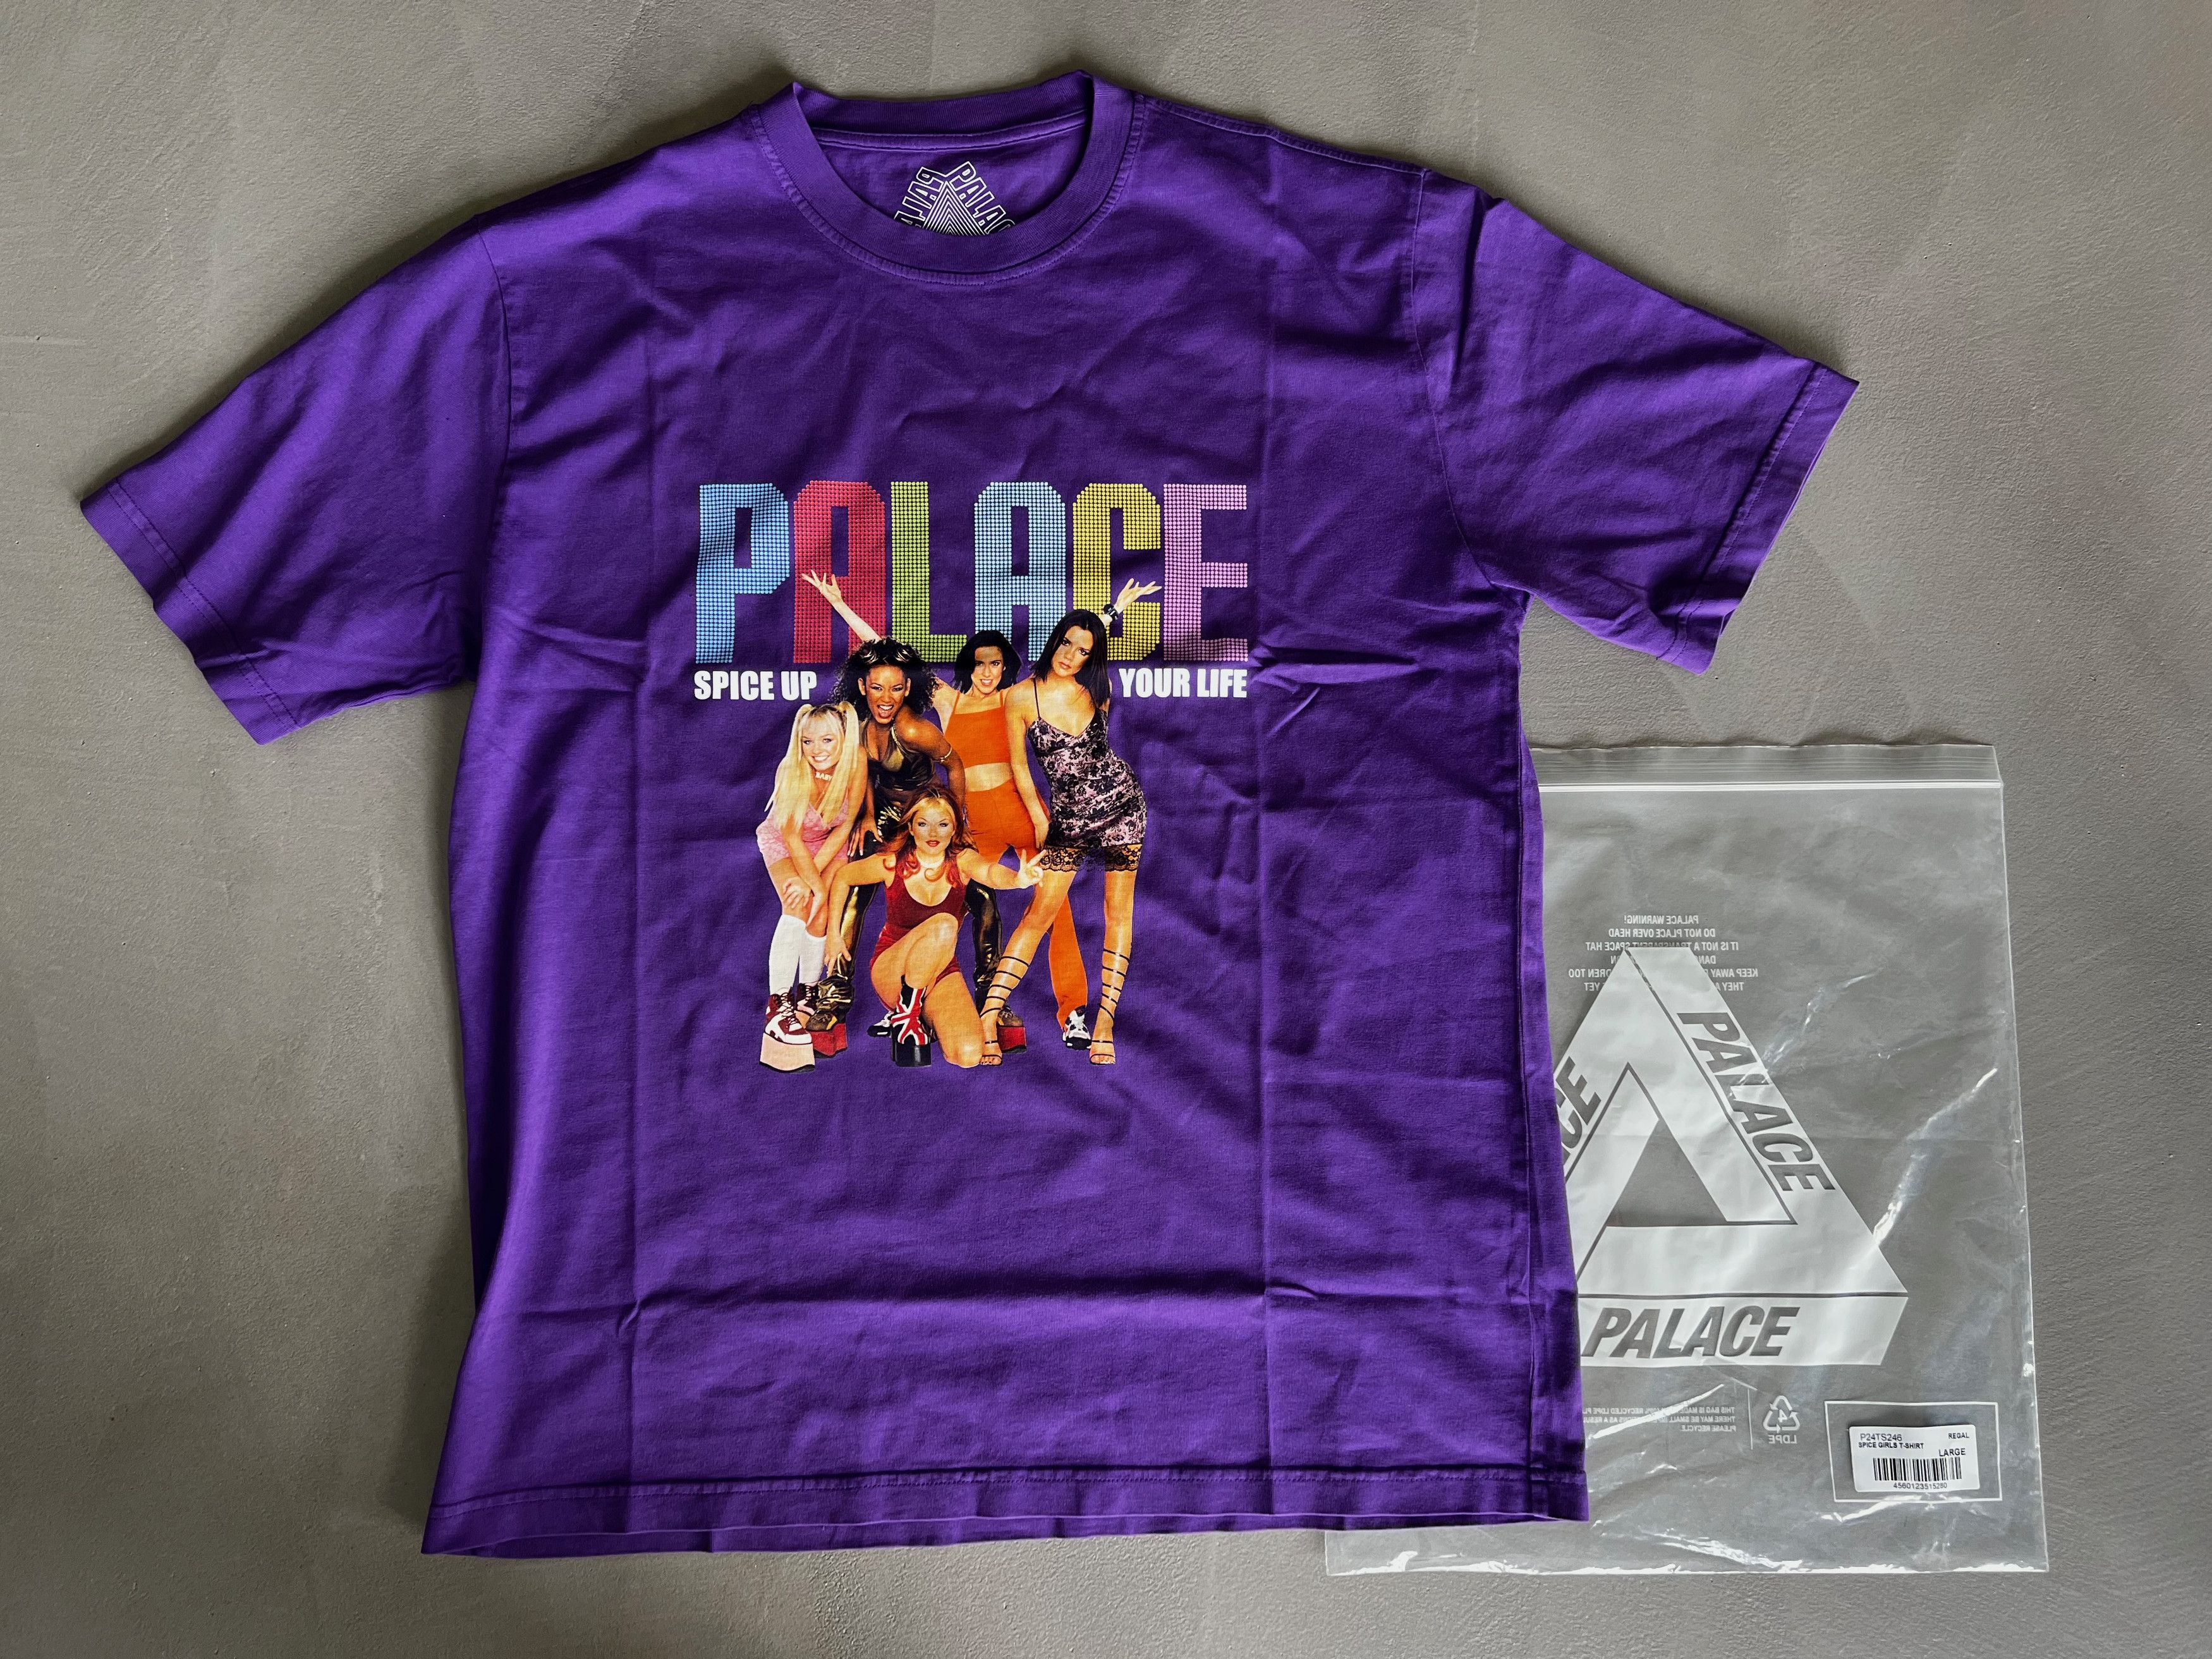 Palace PALACE Spice Girls T-Shirt, Regal | Grailed